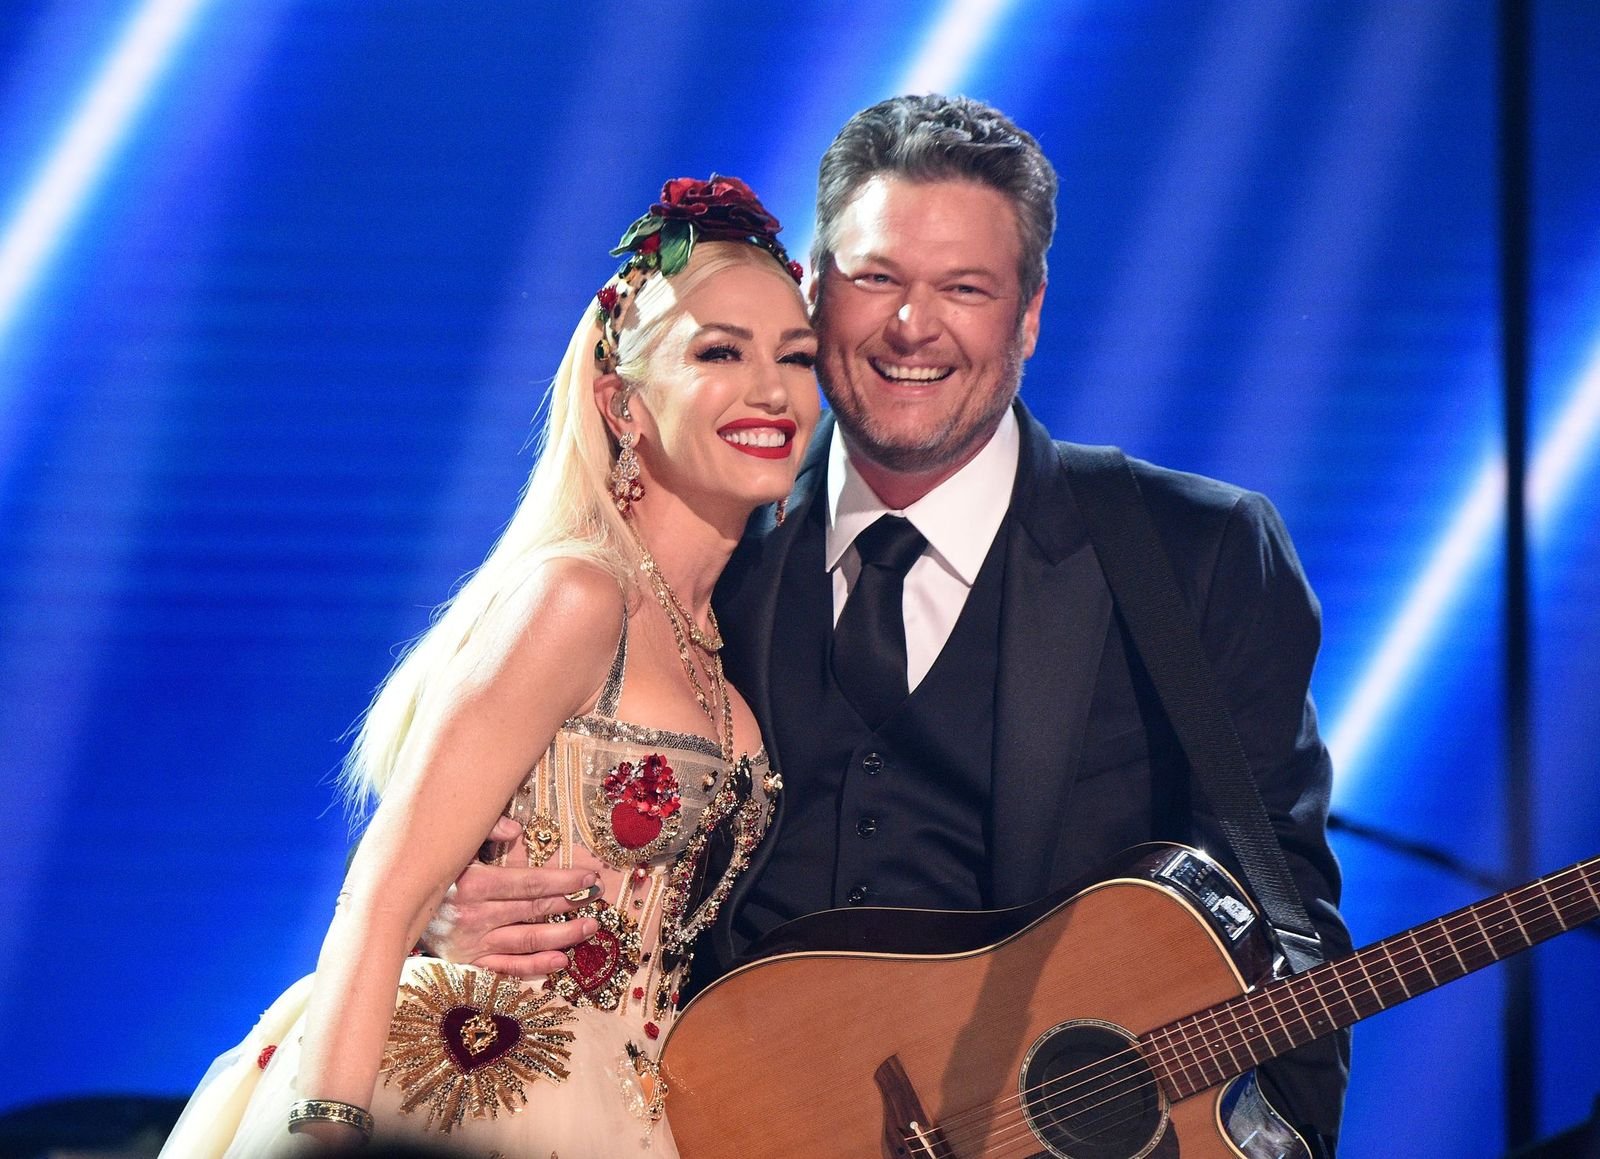 Gwen Stefani and Blake Shelton pose onstage during the 62nd Annual Grammy Awards on January 26, 2020, in Los Angeles, California | Photo: Kevin Mazur/Getty Images